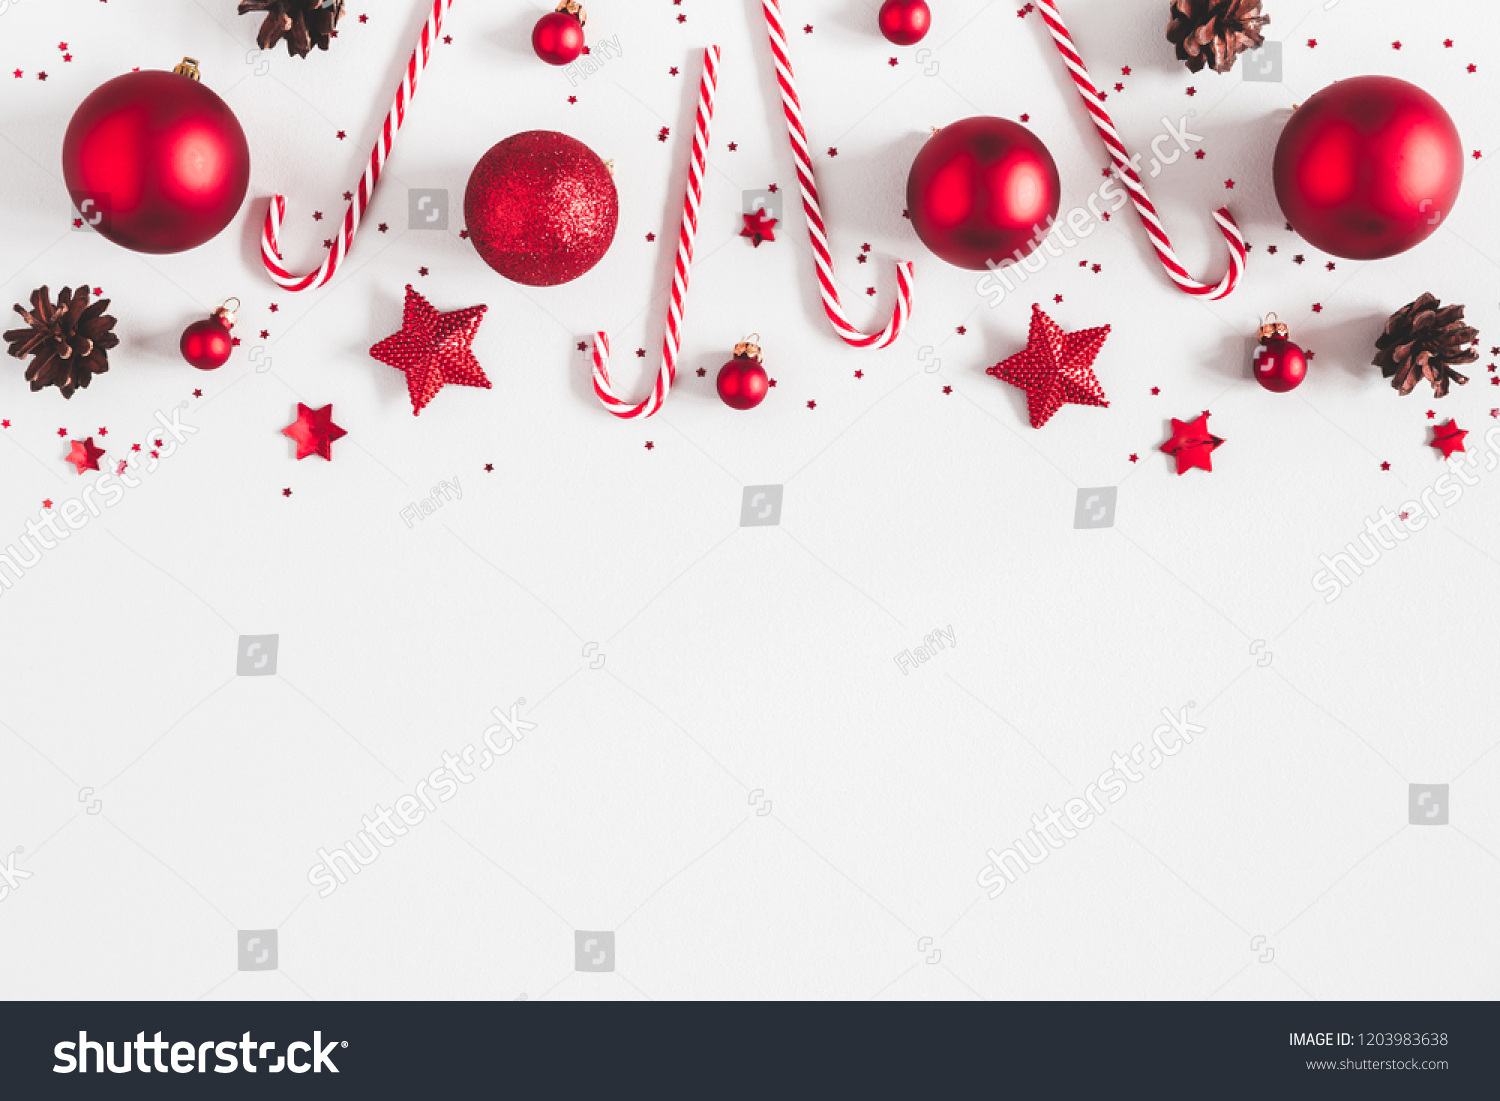 Christmas composition. Border made of red decorations on white background. Christmas, winter, new year concept. Flat lay, top view, copy space #1203983638